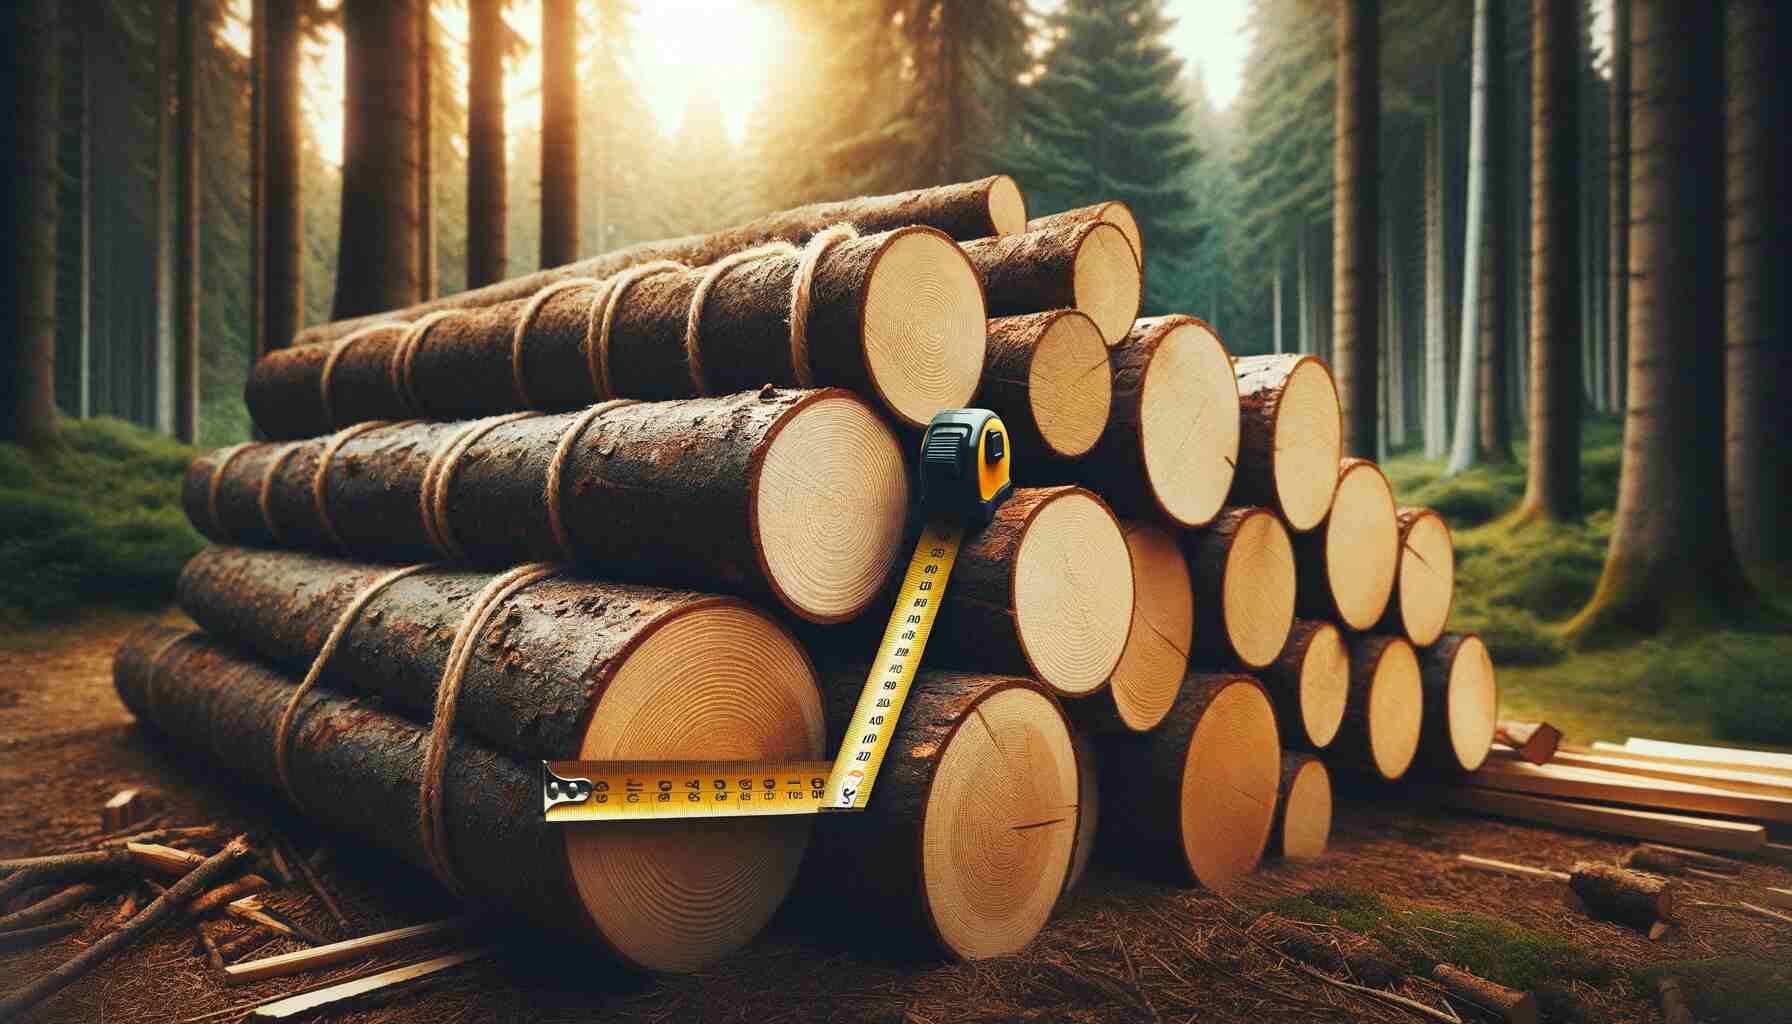 How to Measure a Cord of Firewood: Everything You Need to Know